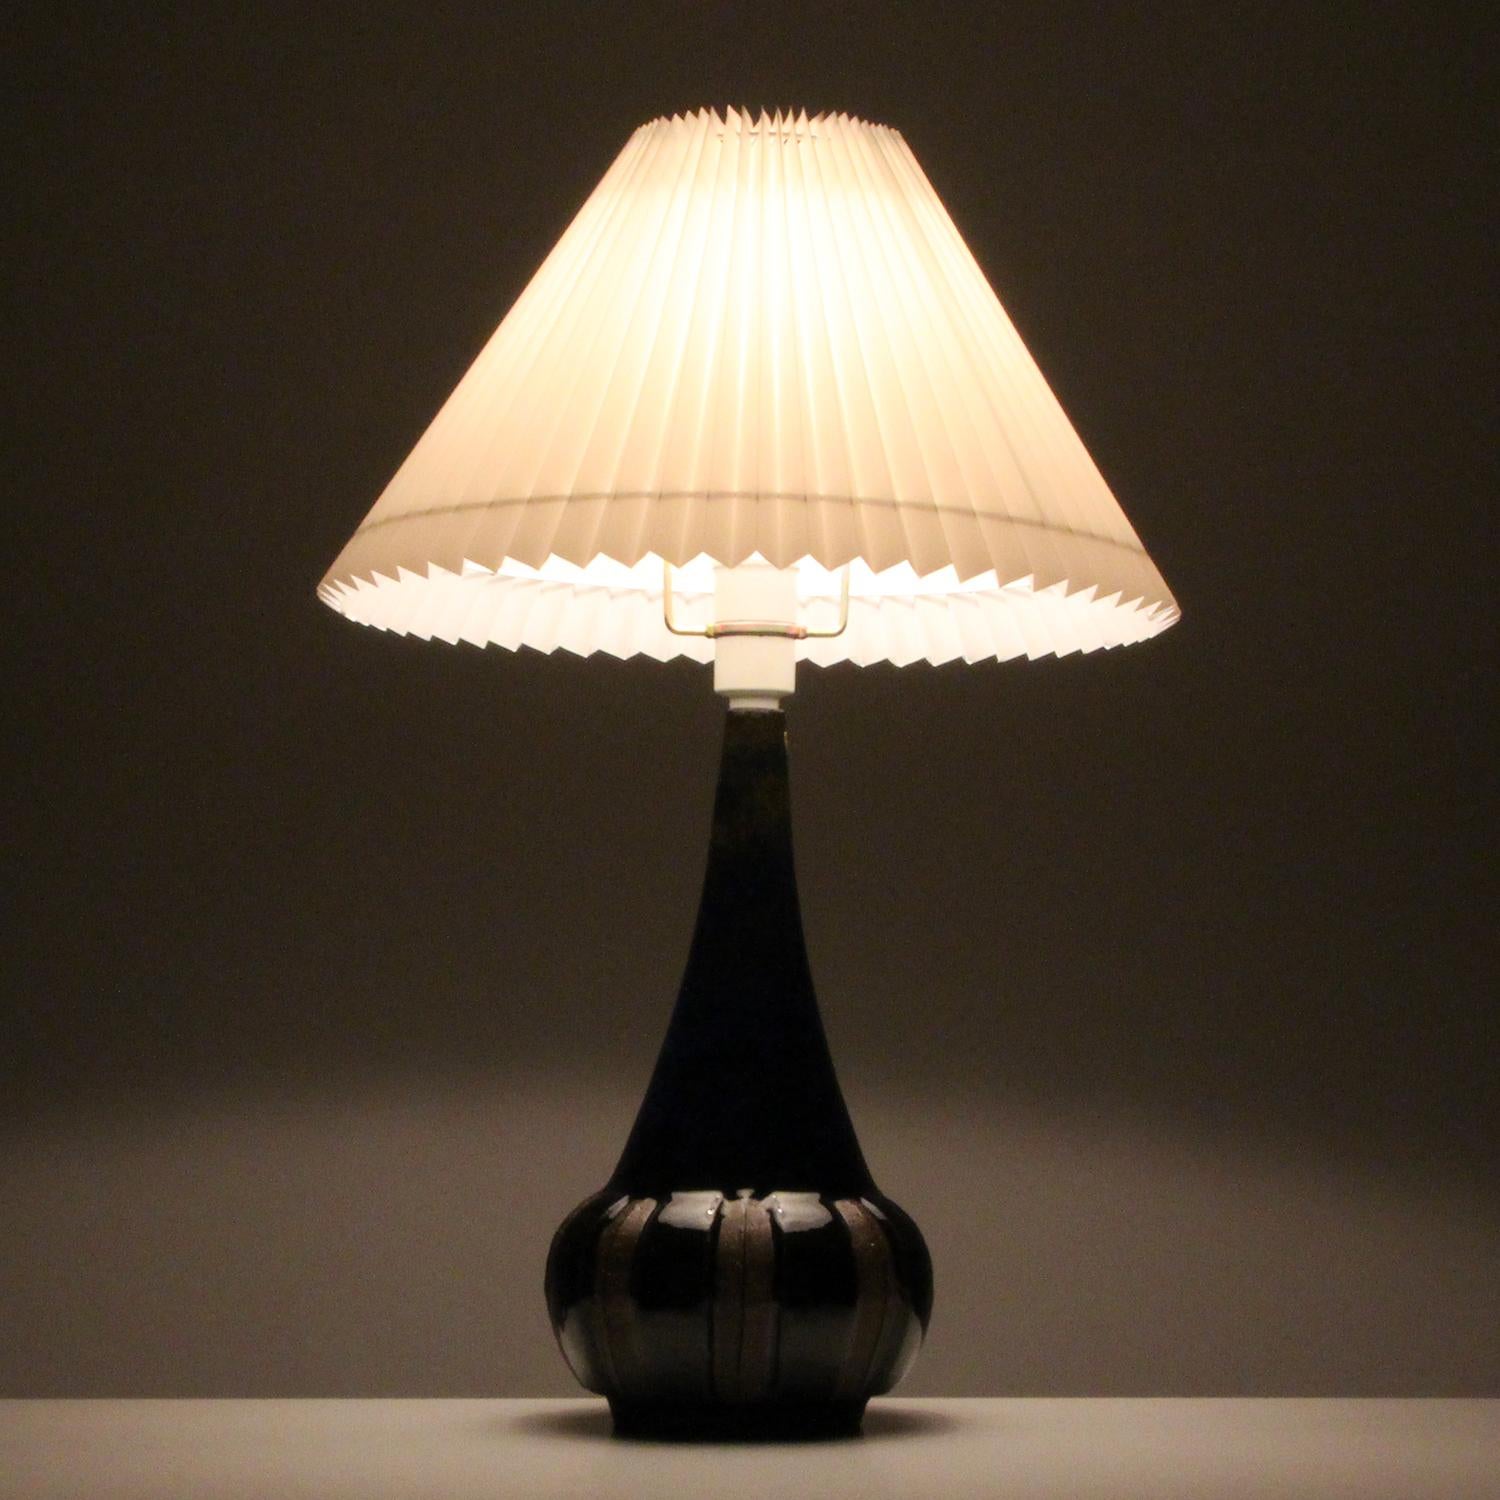 Danish Table Lamp No. 6341 by Marianne Starck, Michael Andersen & Son 1960s, with Shade